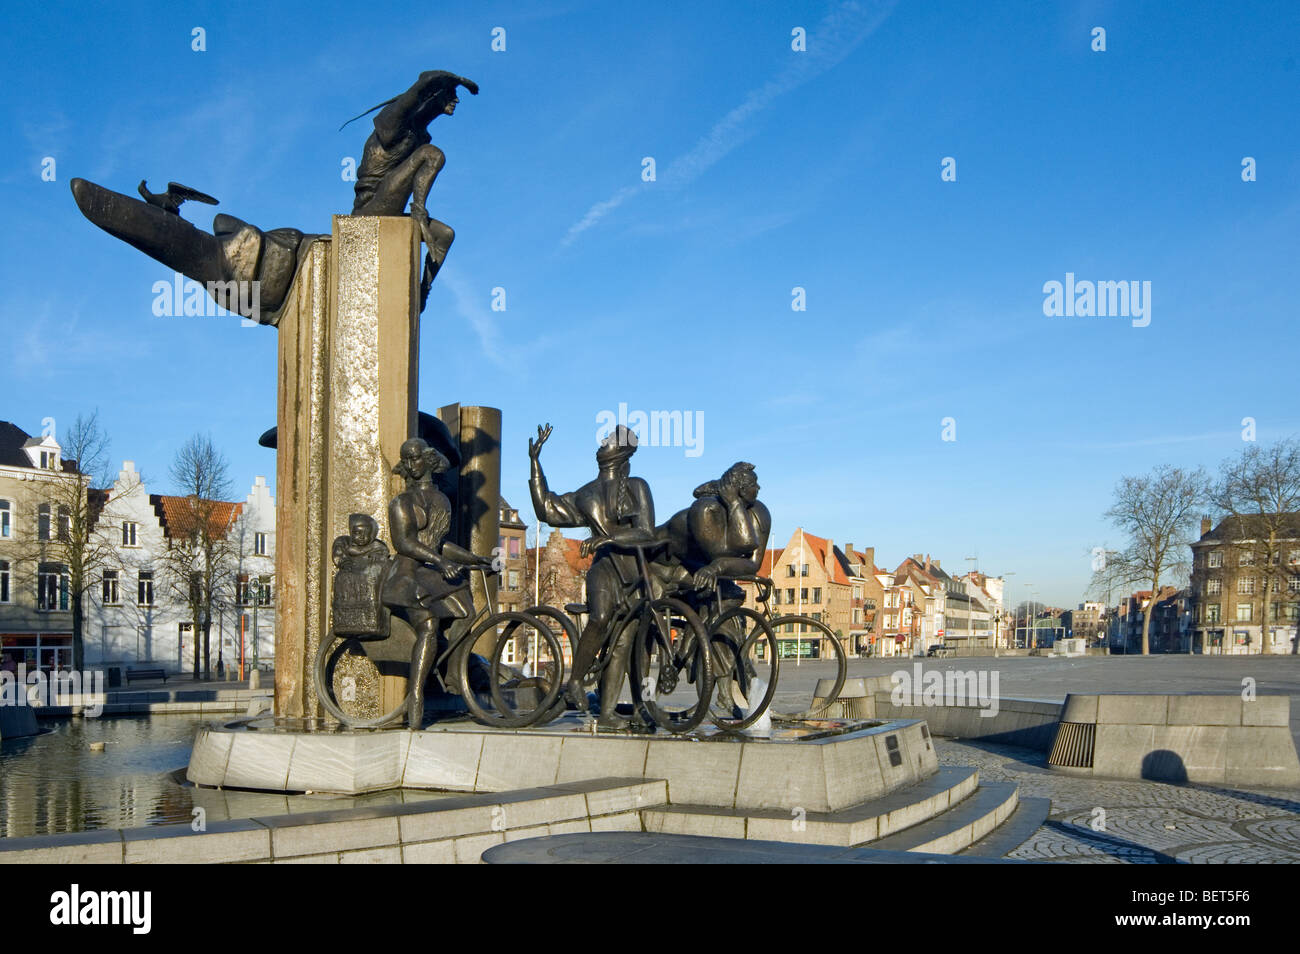 Sculpture group with fountain at the square Het Zand in the city Bruges, West Flanders, Belgium Stock Photo